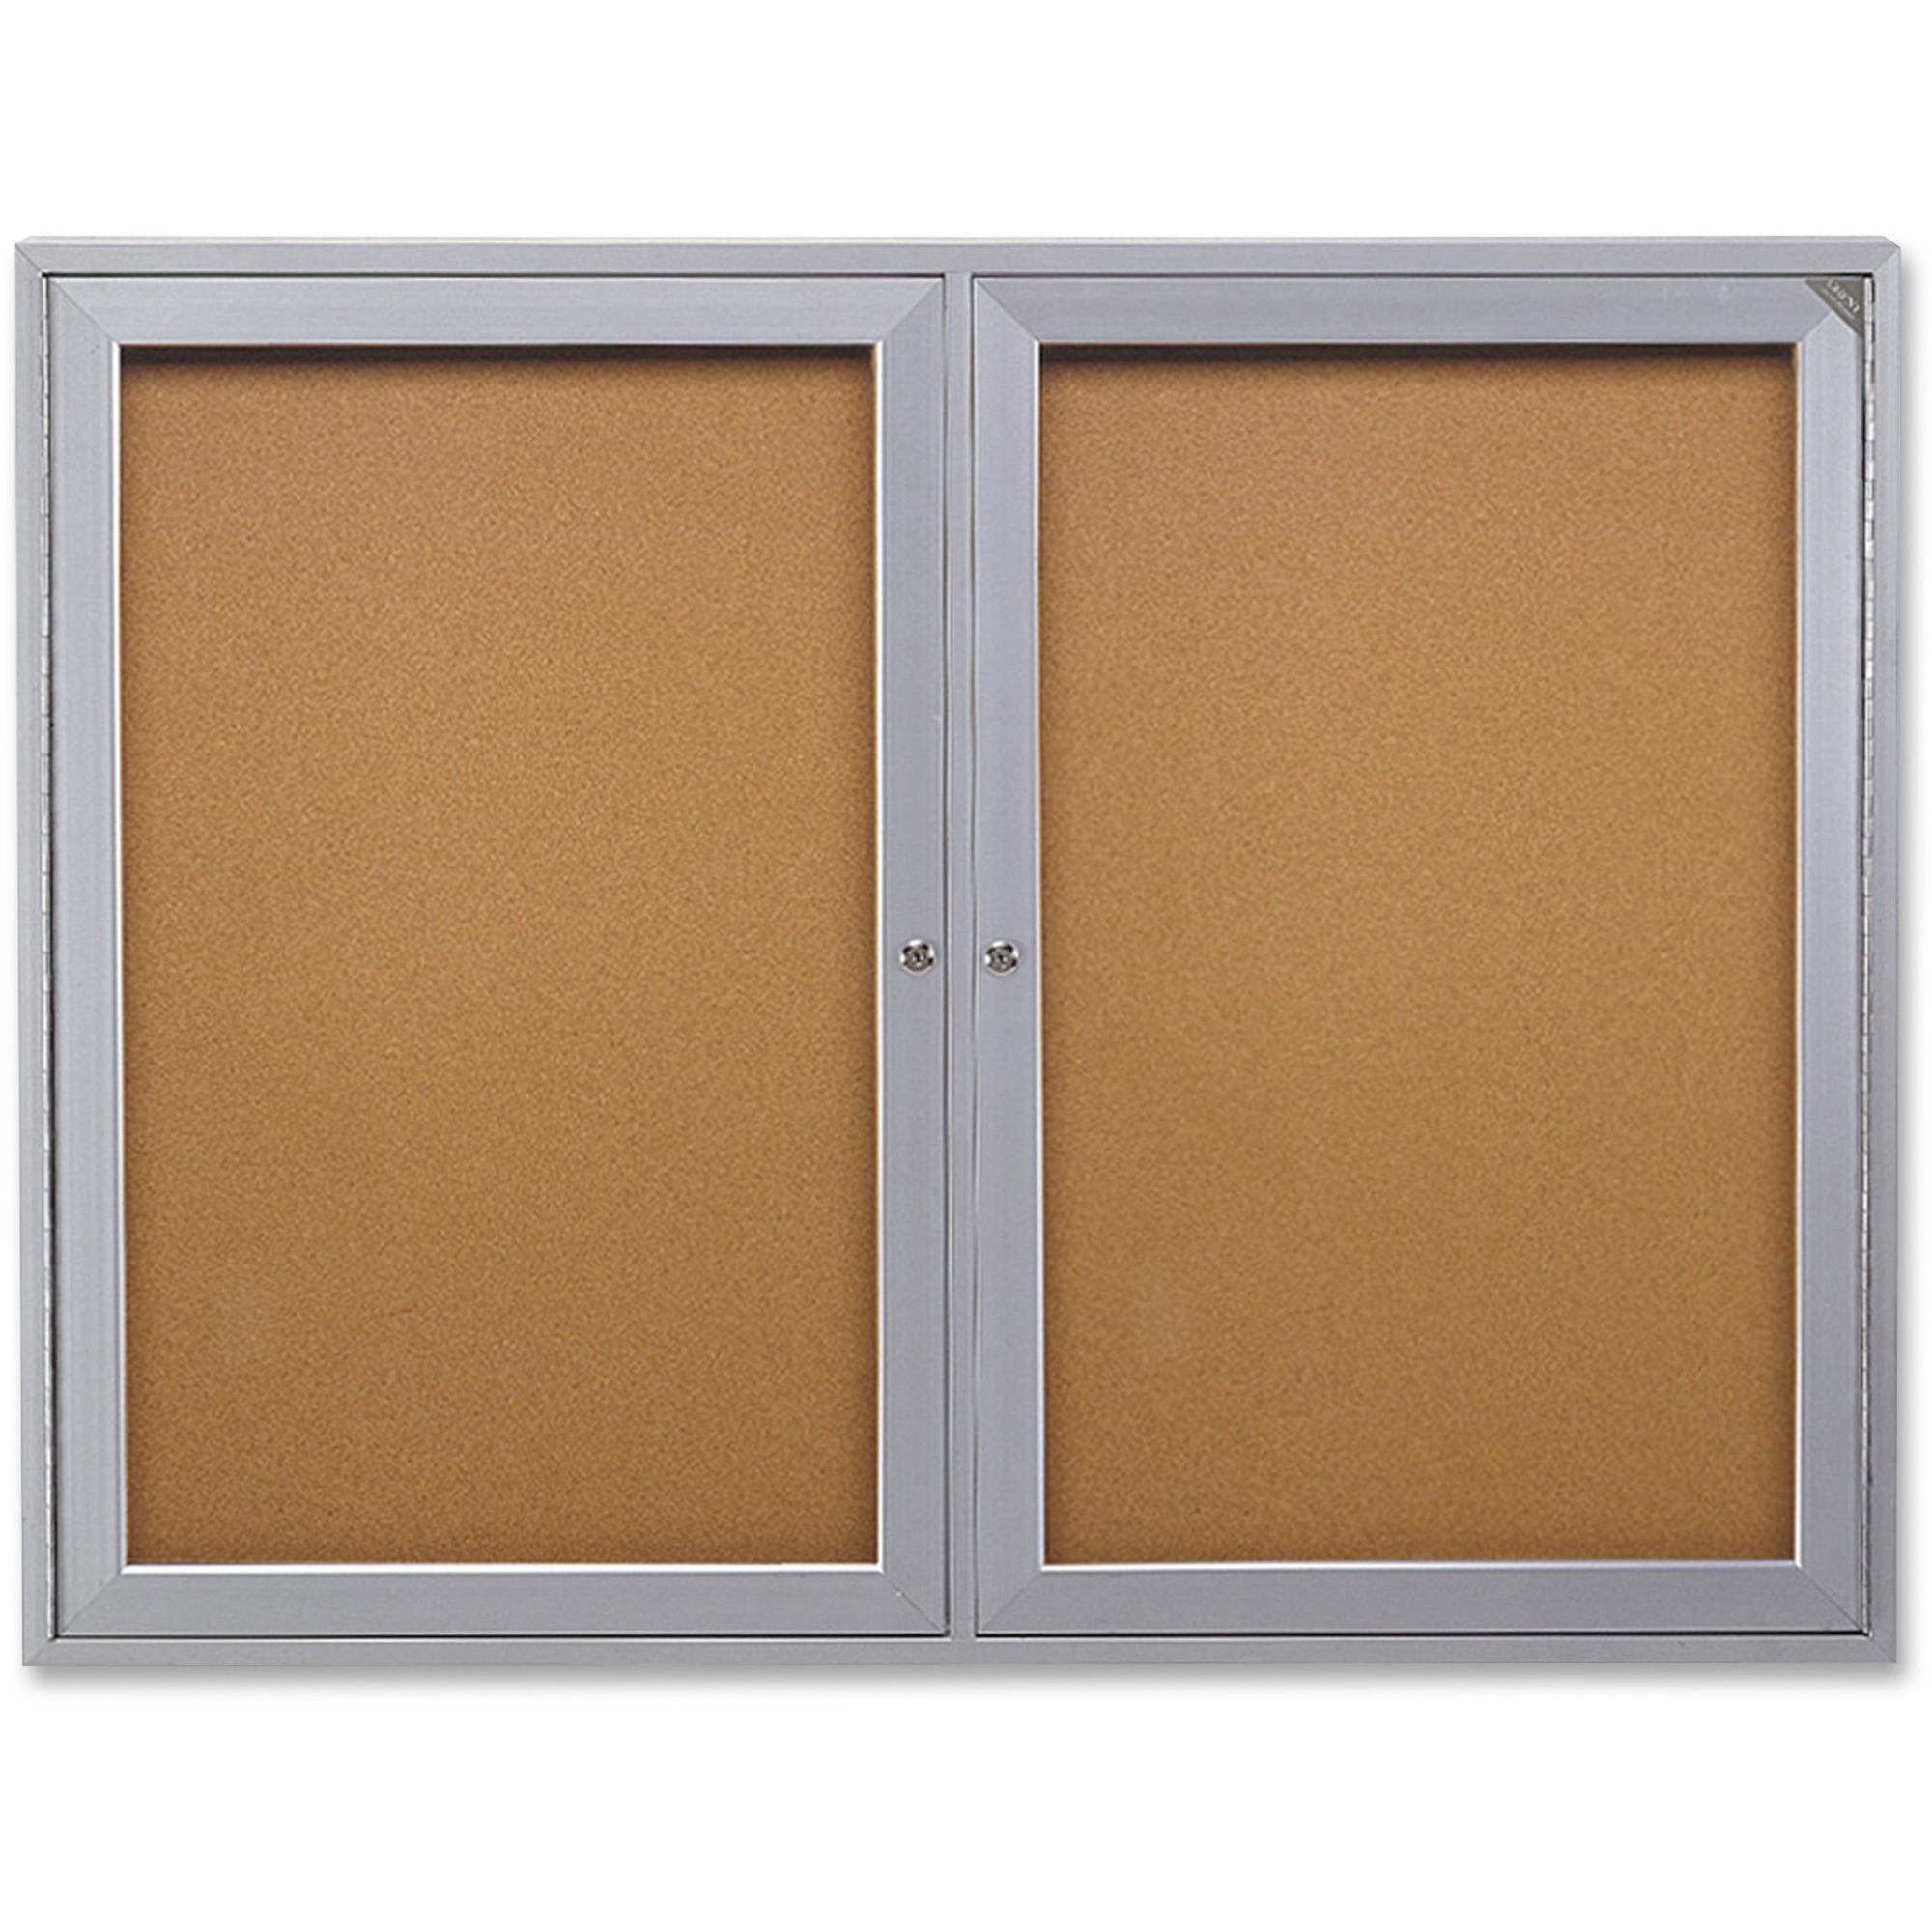 Home Office Supplies Boards And Easels Boards Bulletin Boards Ghent 2 Door Enclosed